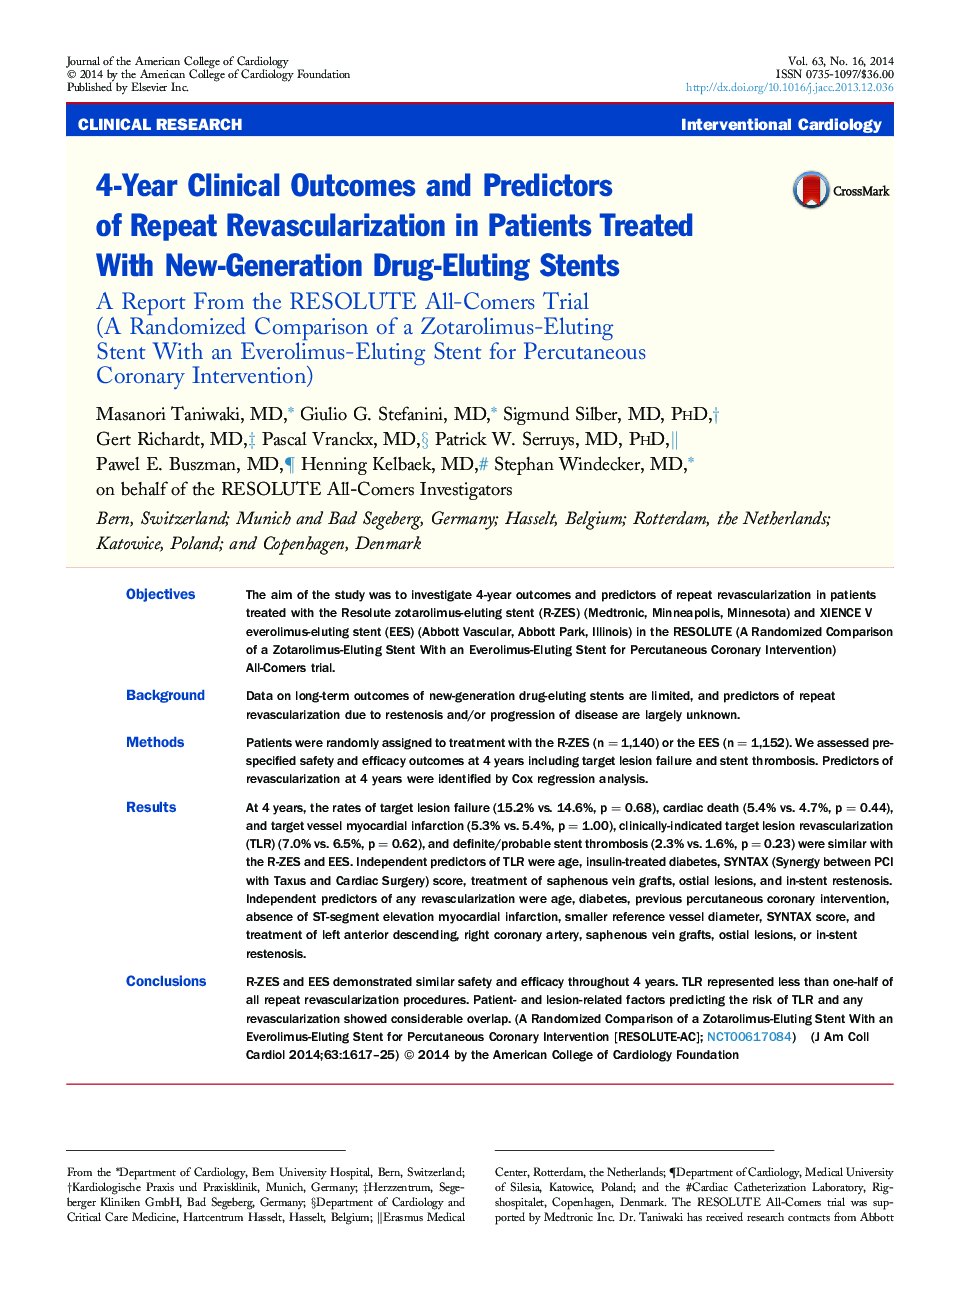 4-Year Clinical Outcomes and Predictors of Repeat Revascularization in Patients Treated With New-Generation Drug-Eluting Stents : A Report From the RESOLUTE All-Comers Trial (A Randomized Comparison of a Zotarolimus-Eluting Stent With an Everolimus-Elutin